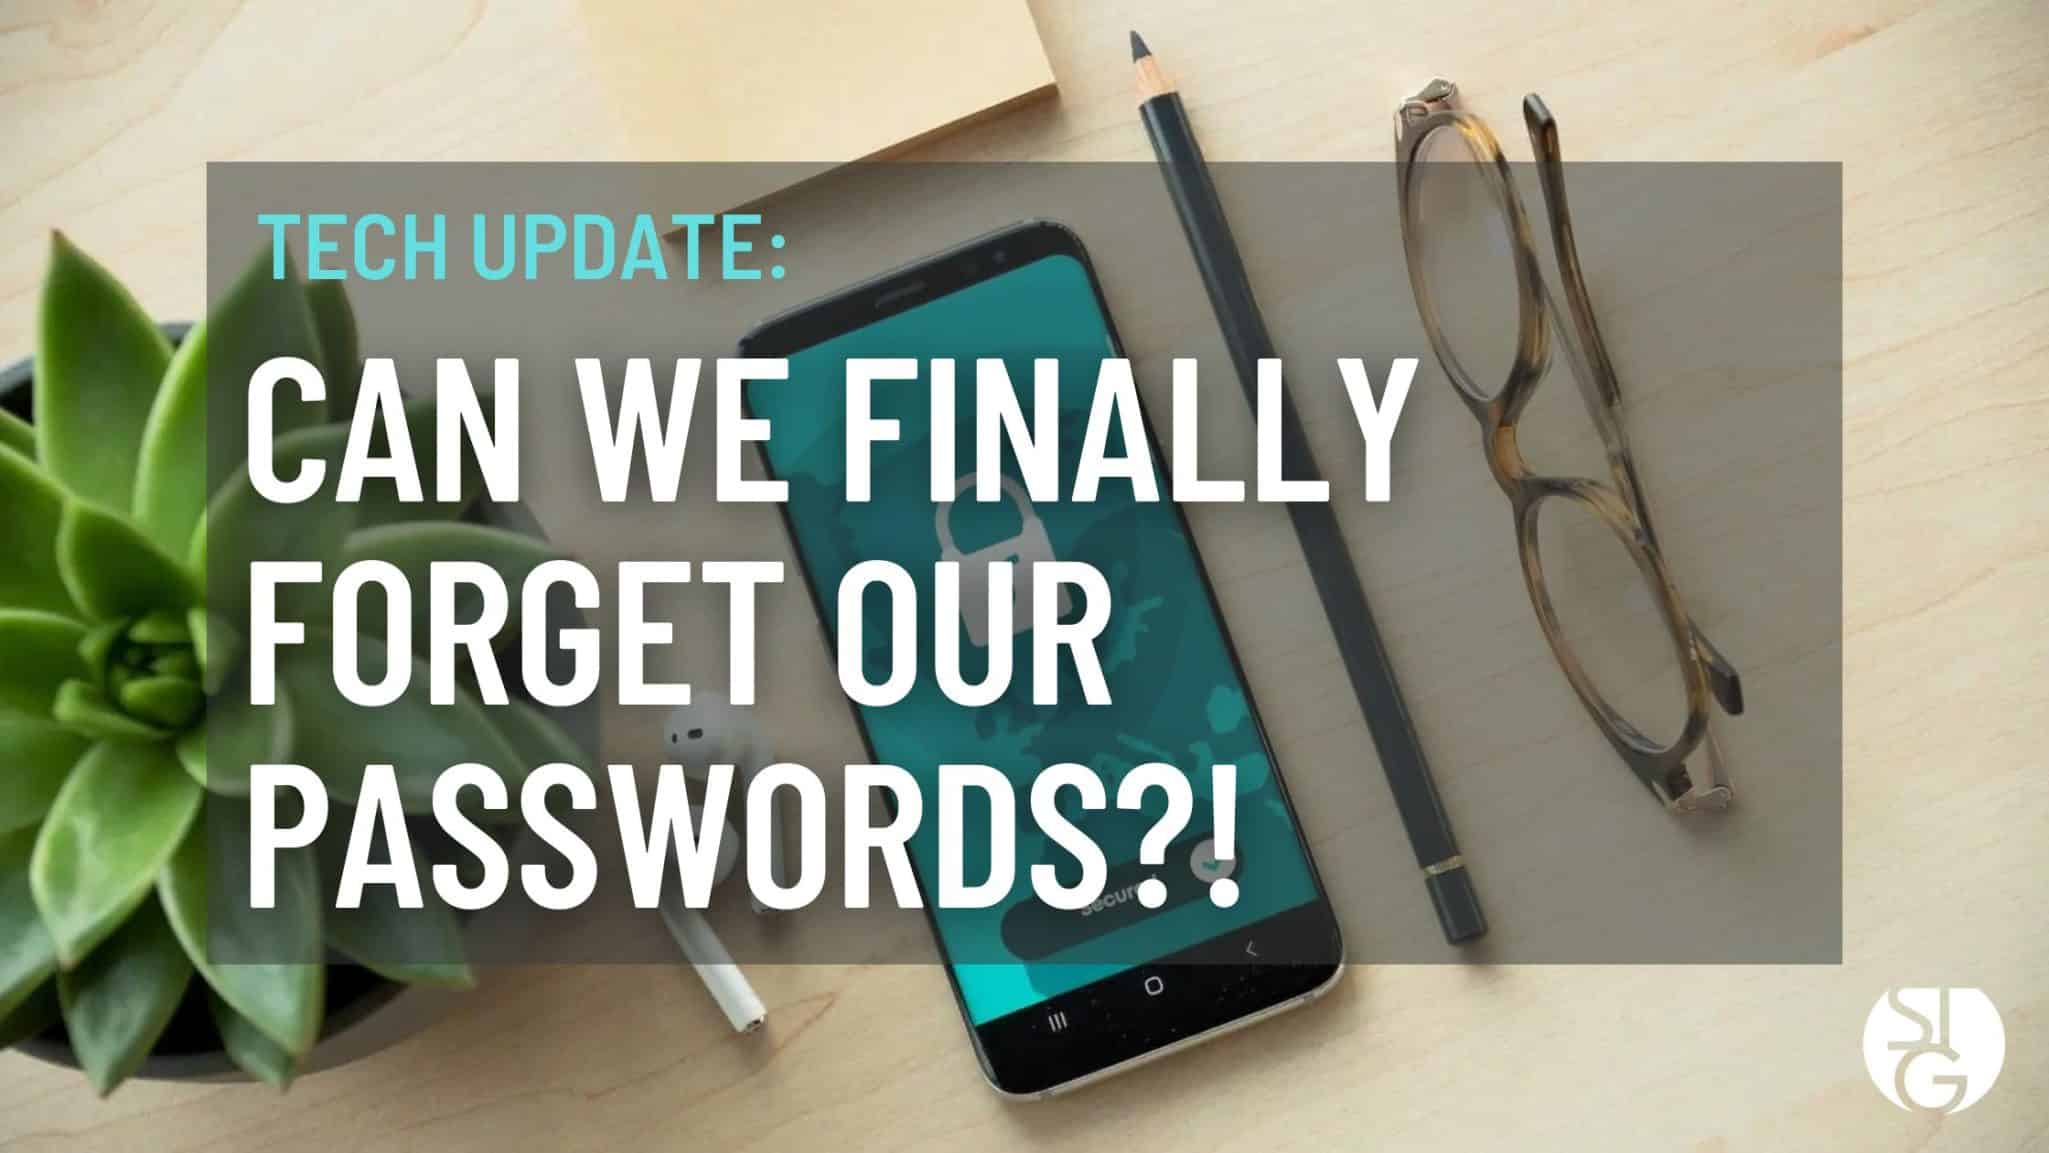 When Can You Comfortably Forget Your Password